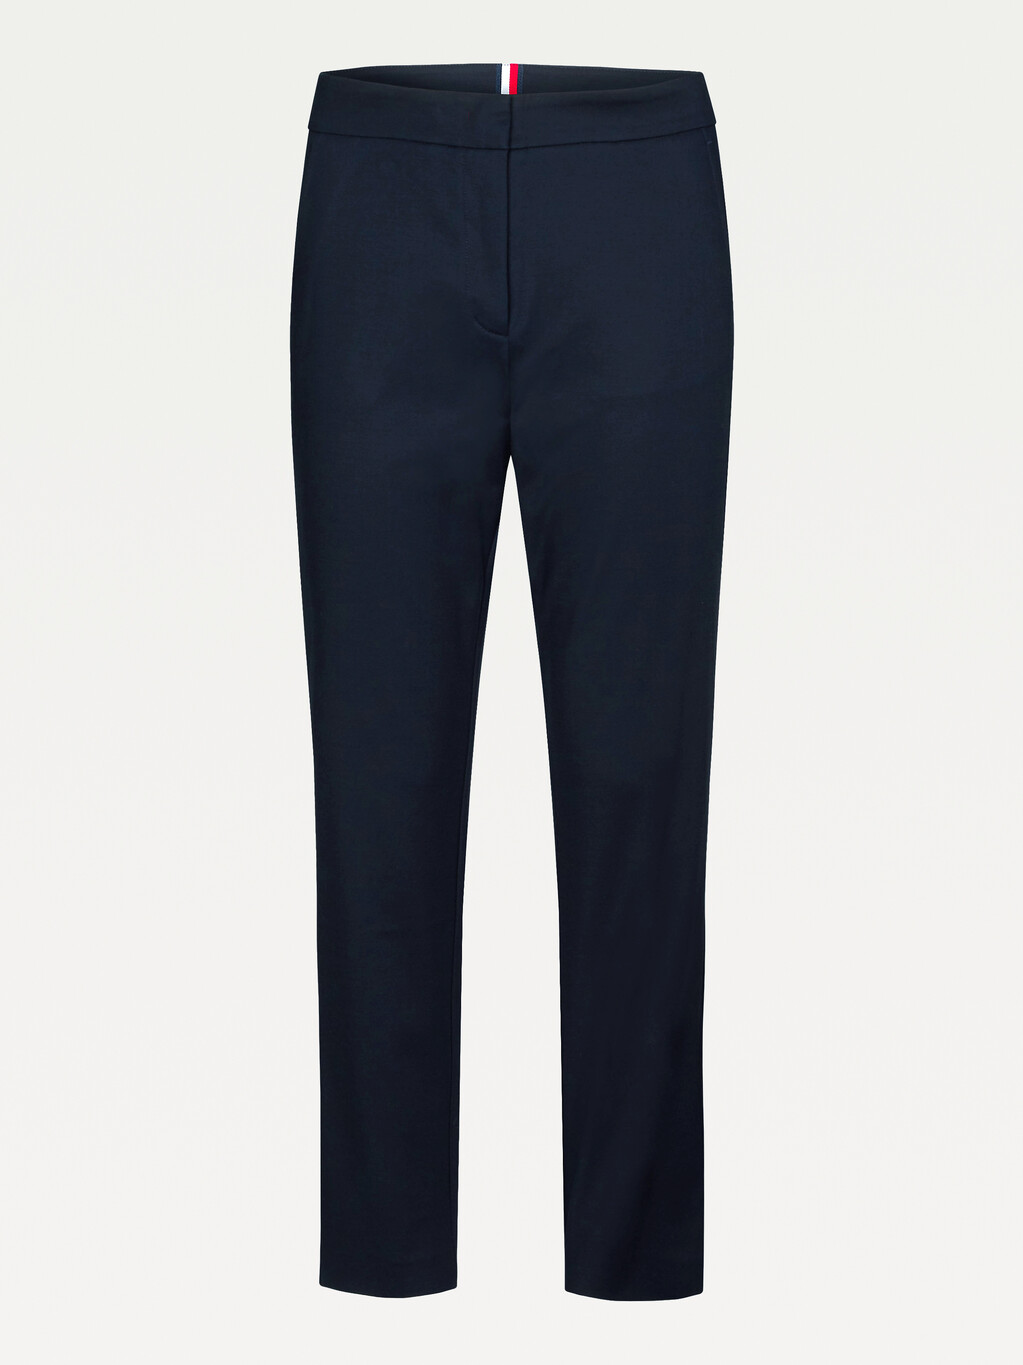 Stretch Cotton Slim Fit Trousers